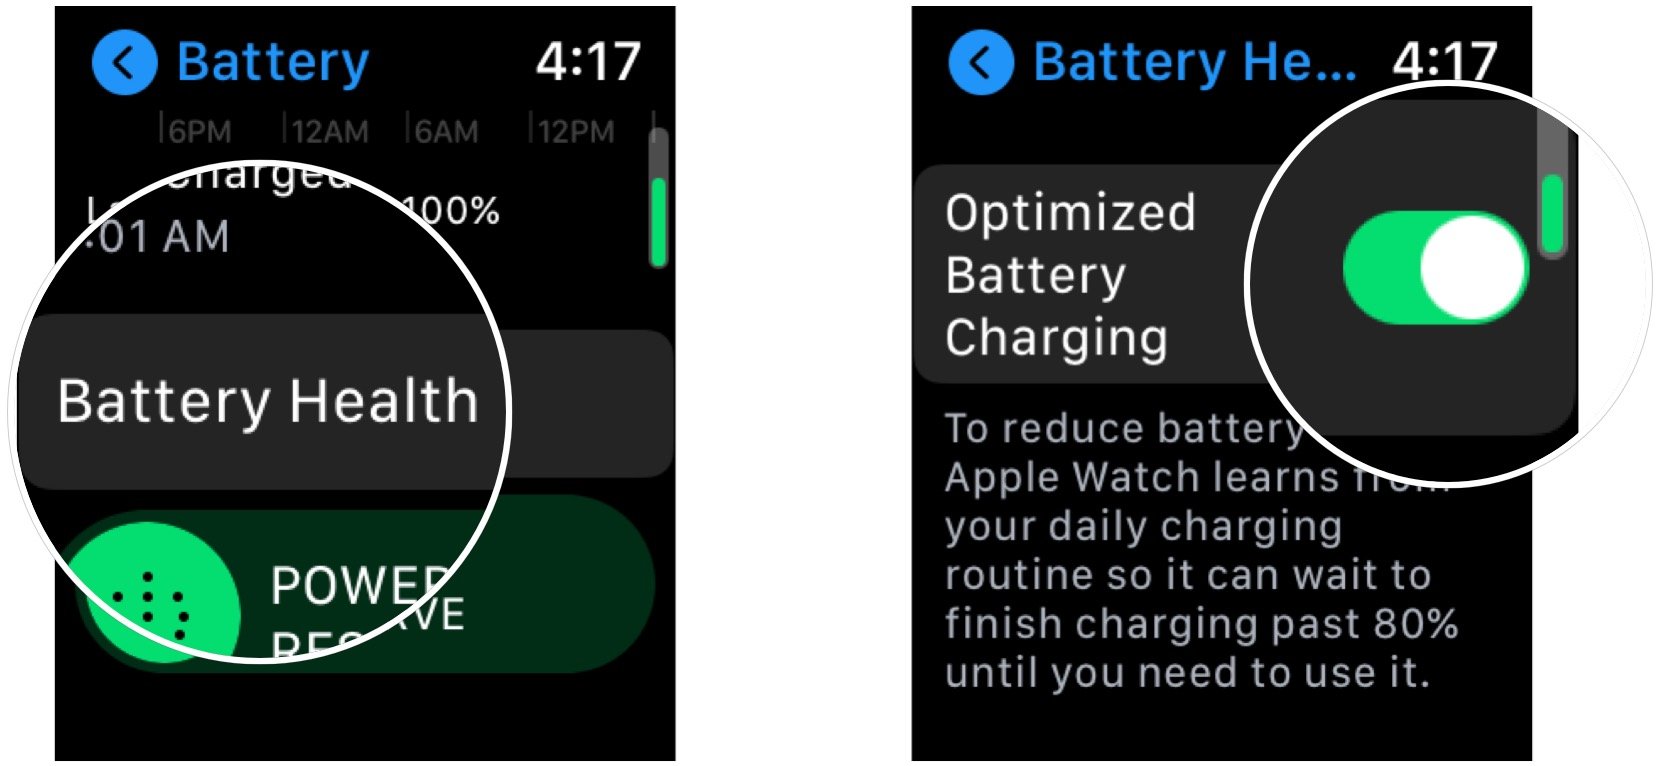 Turn on optimized battery charging on Apple Watch, showing how to tap Battery Health, then tap the switch next to Optimized Battery Charging